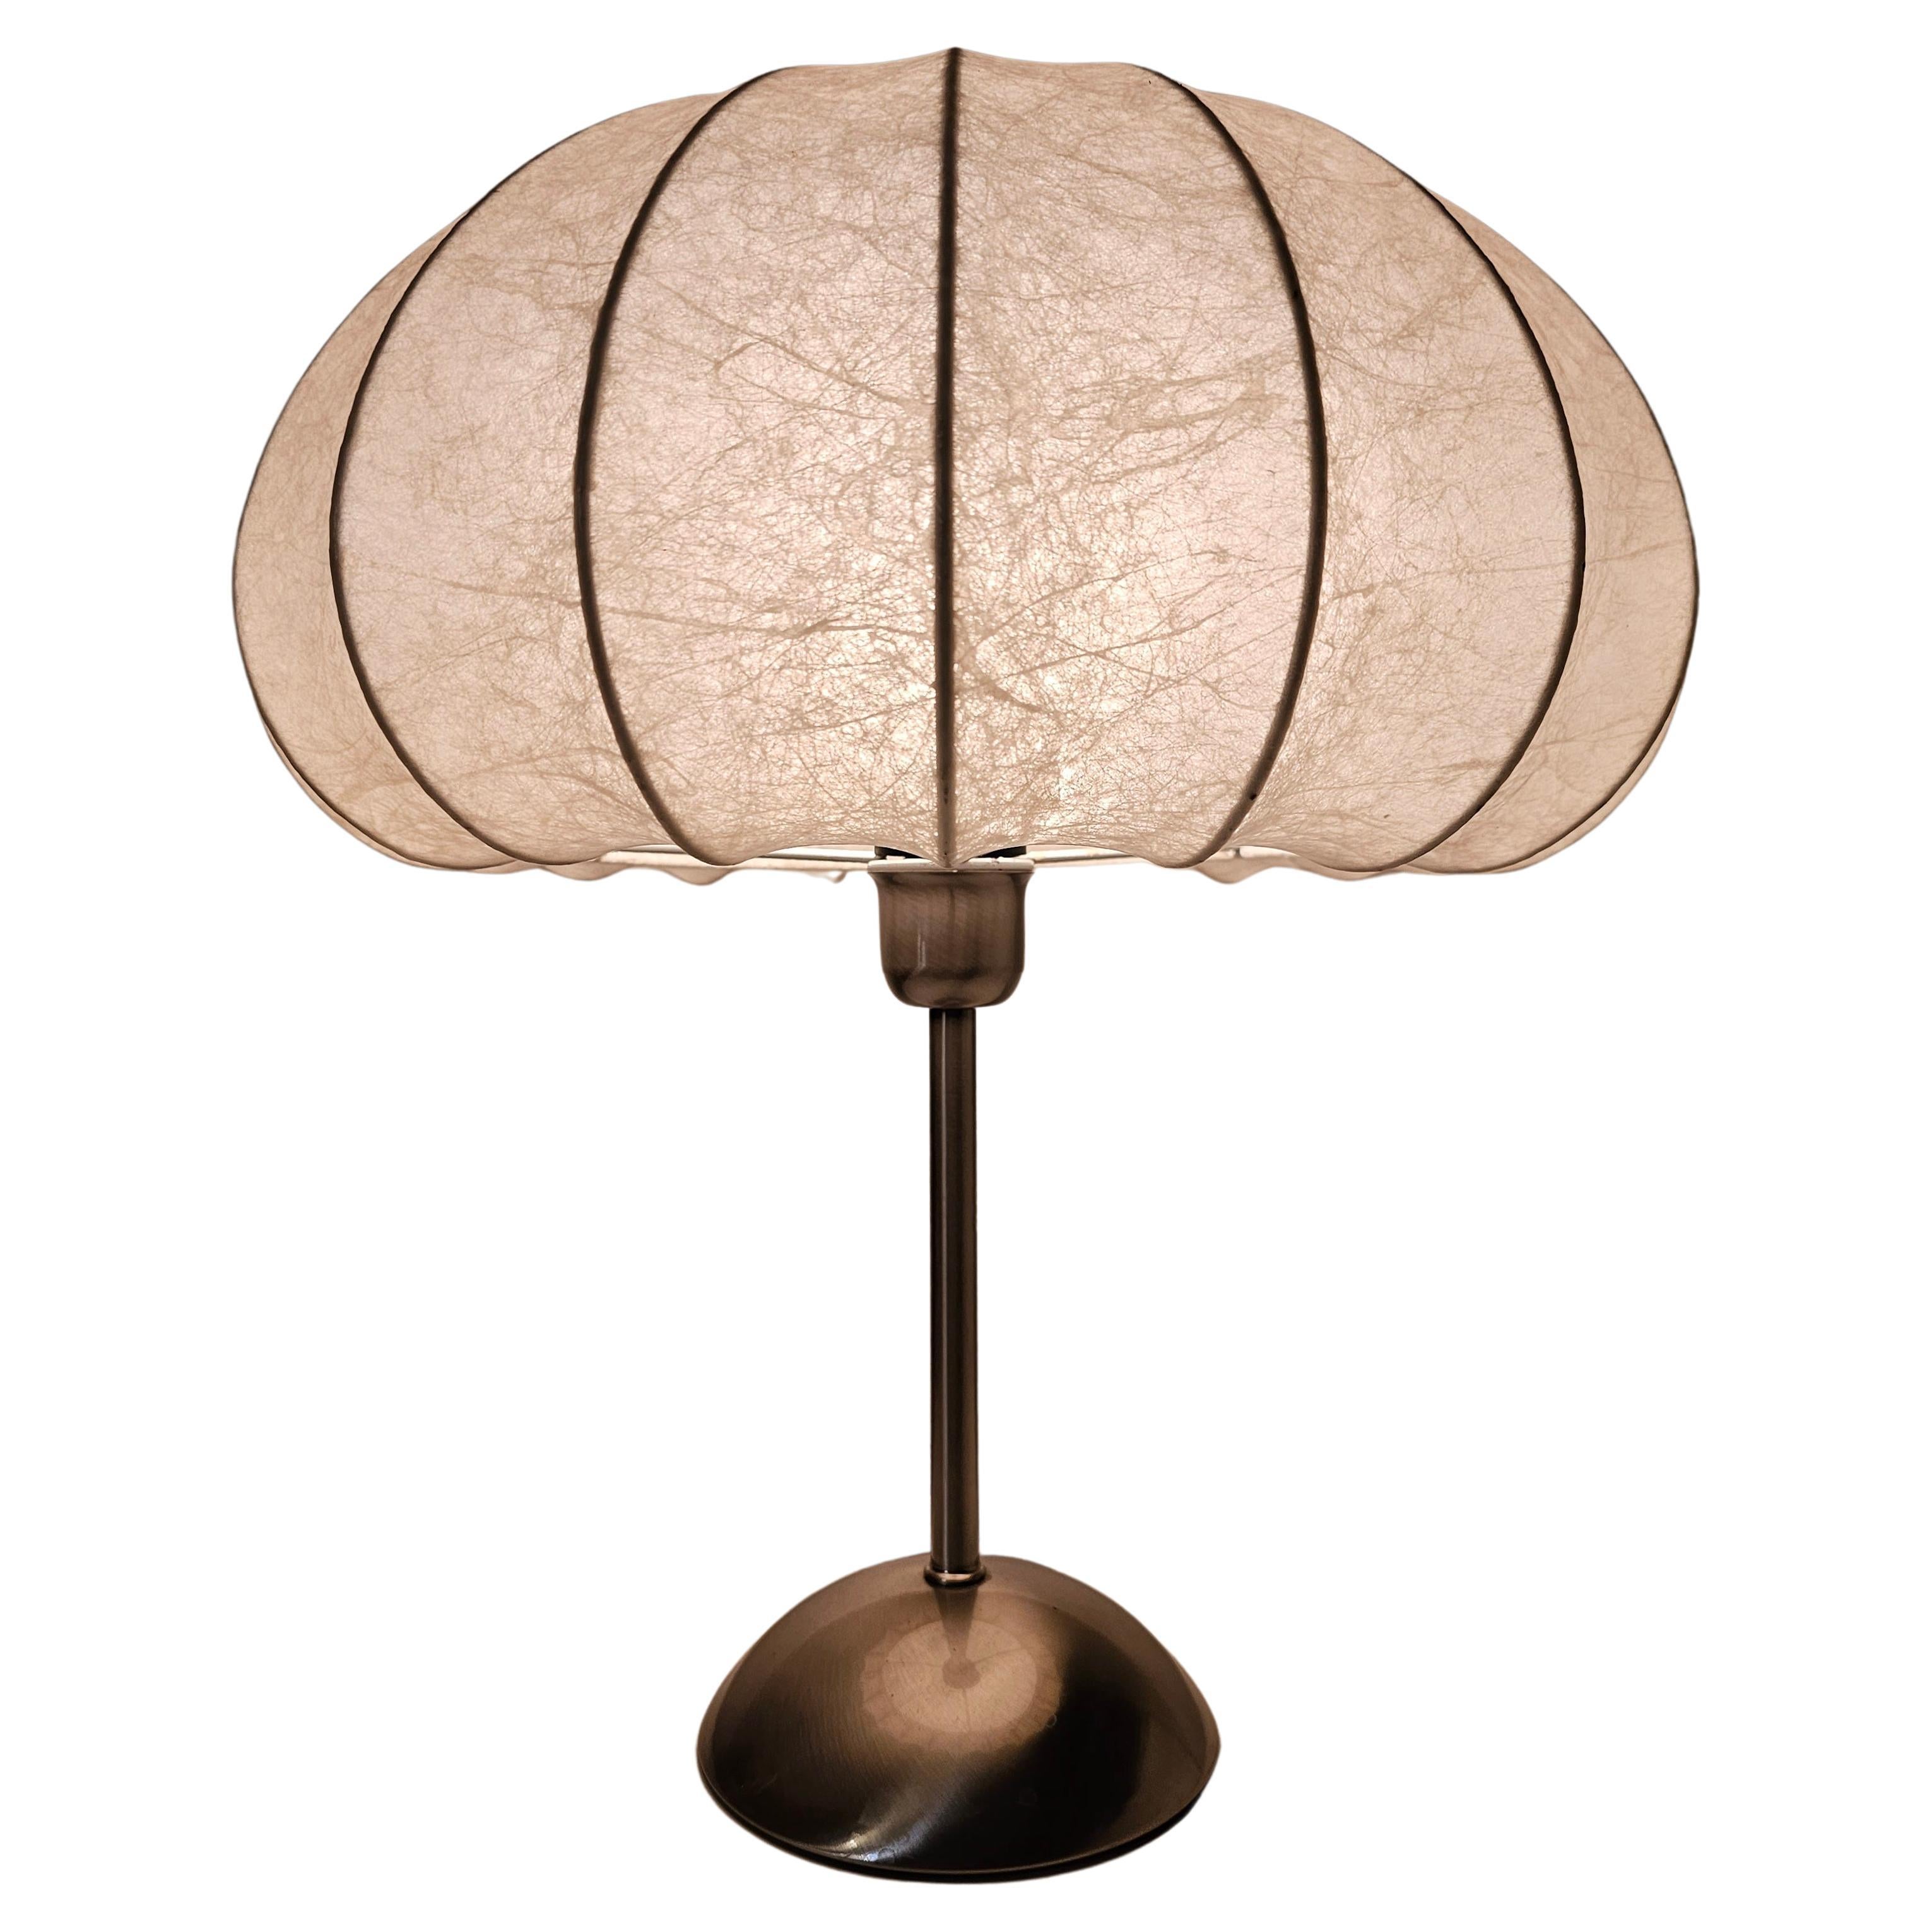 Mid Century Modern Cocoon Table Lamp in style of Achille Castiglioni, Italy 1970 For Sale